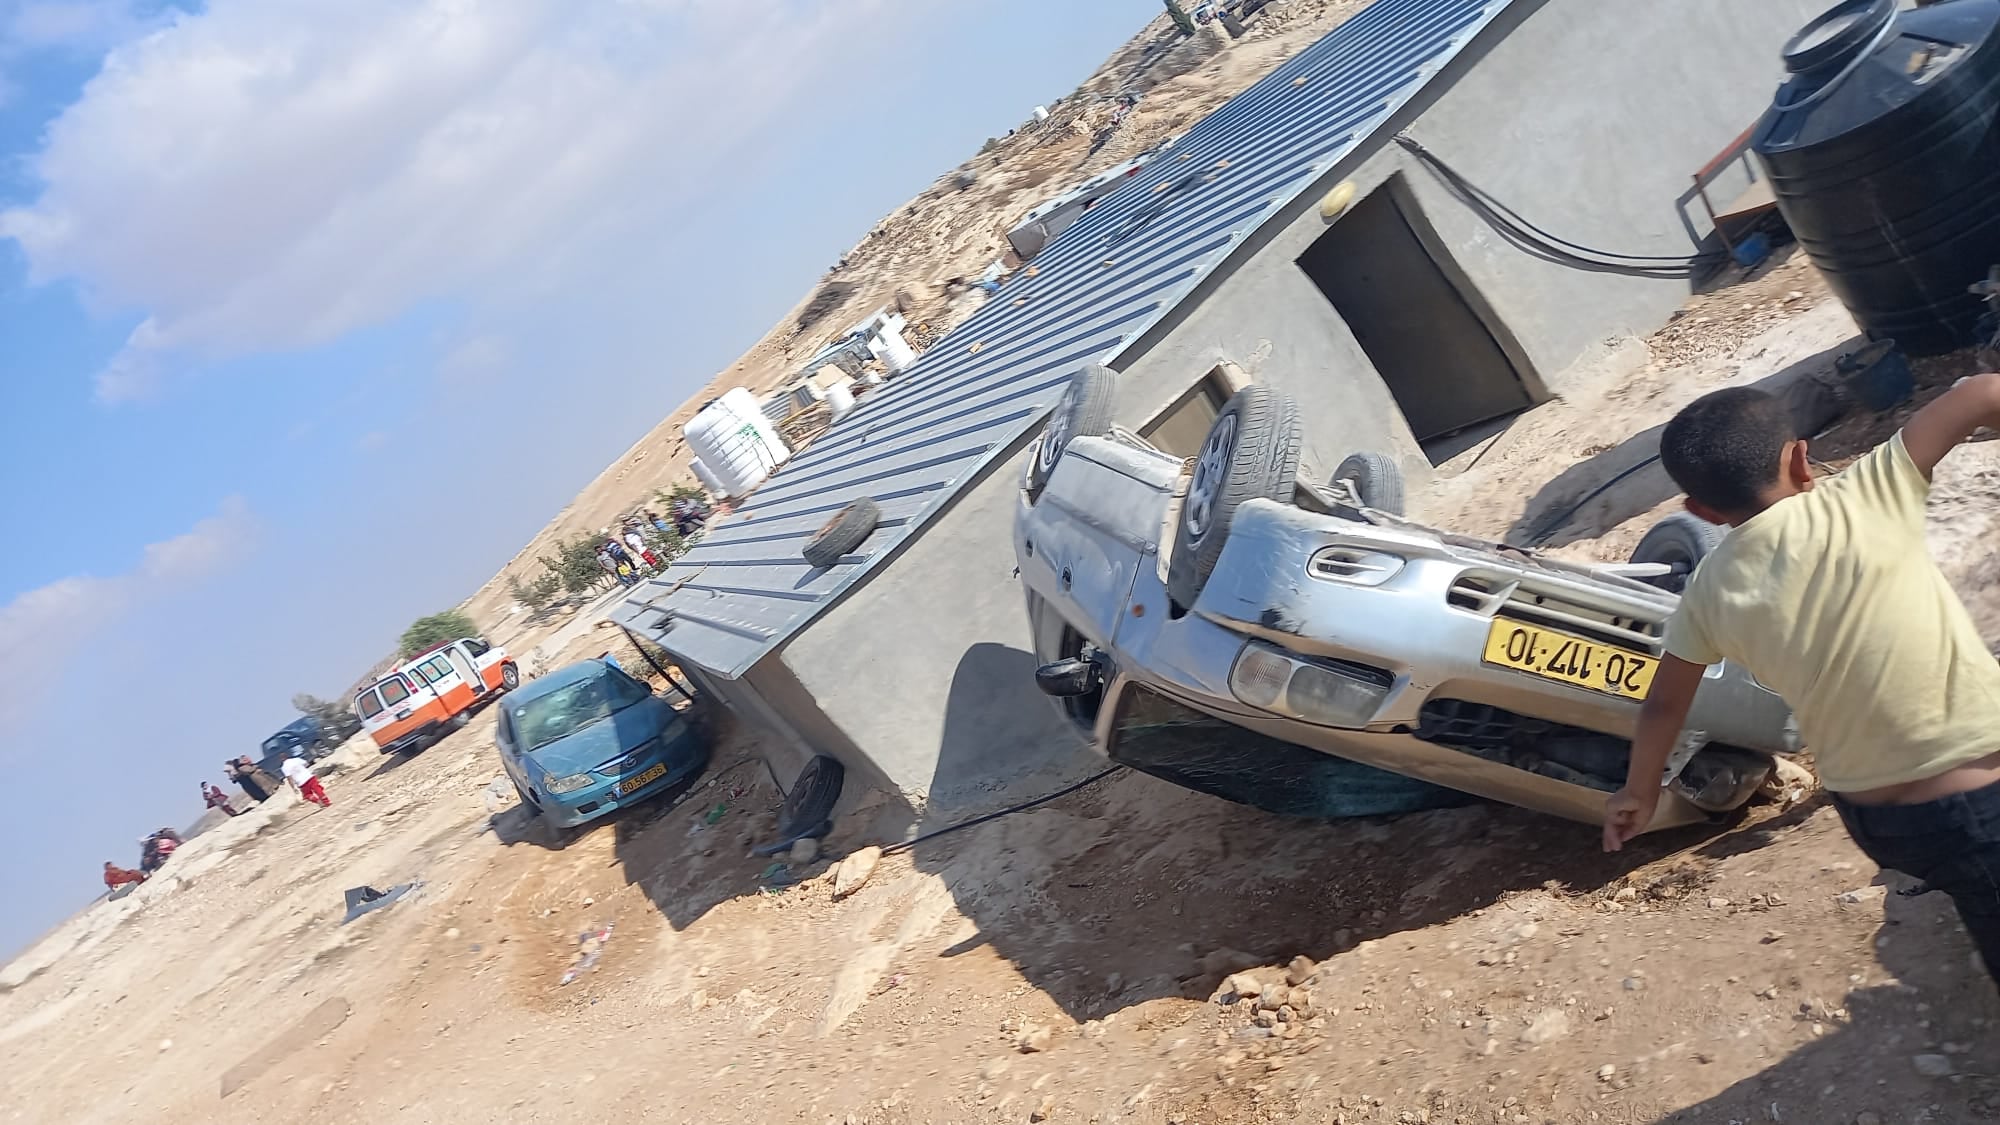 A car seen overturned during a settler attack on the Palestinian village of Mufagara in the South Hebron Hills. Sixty masked settlers attacked people, homes, and cars, September 28, 2021. (Alliance for Human Rights) 